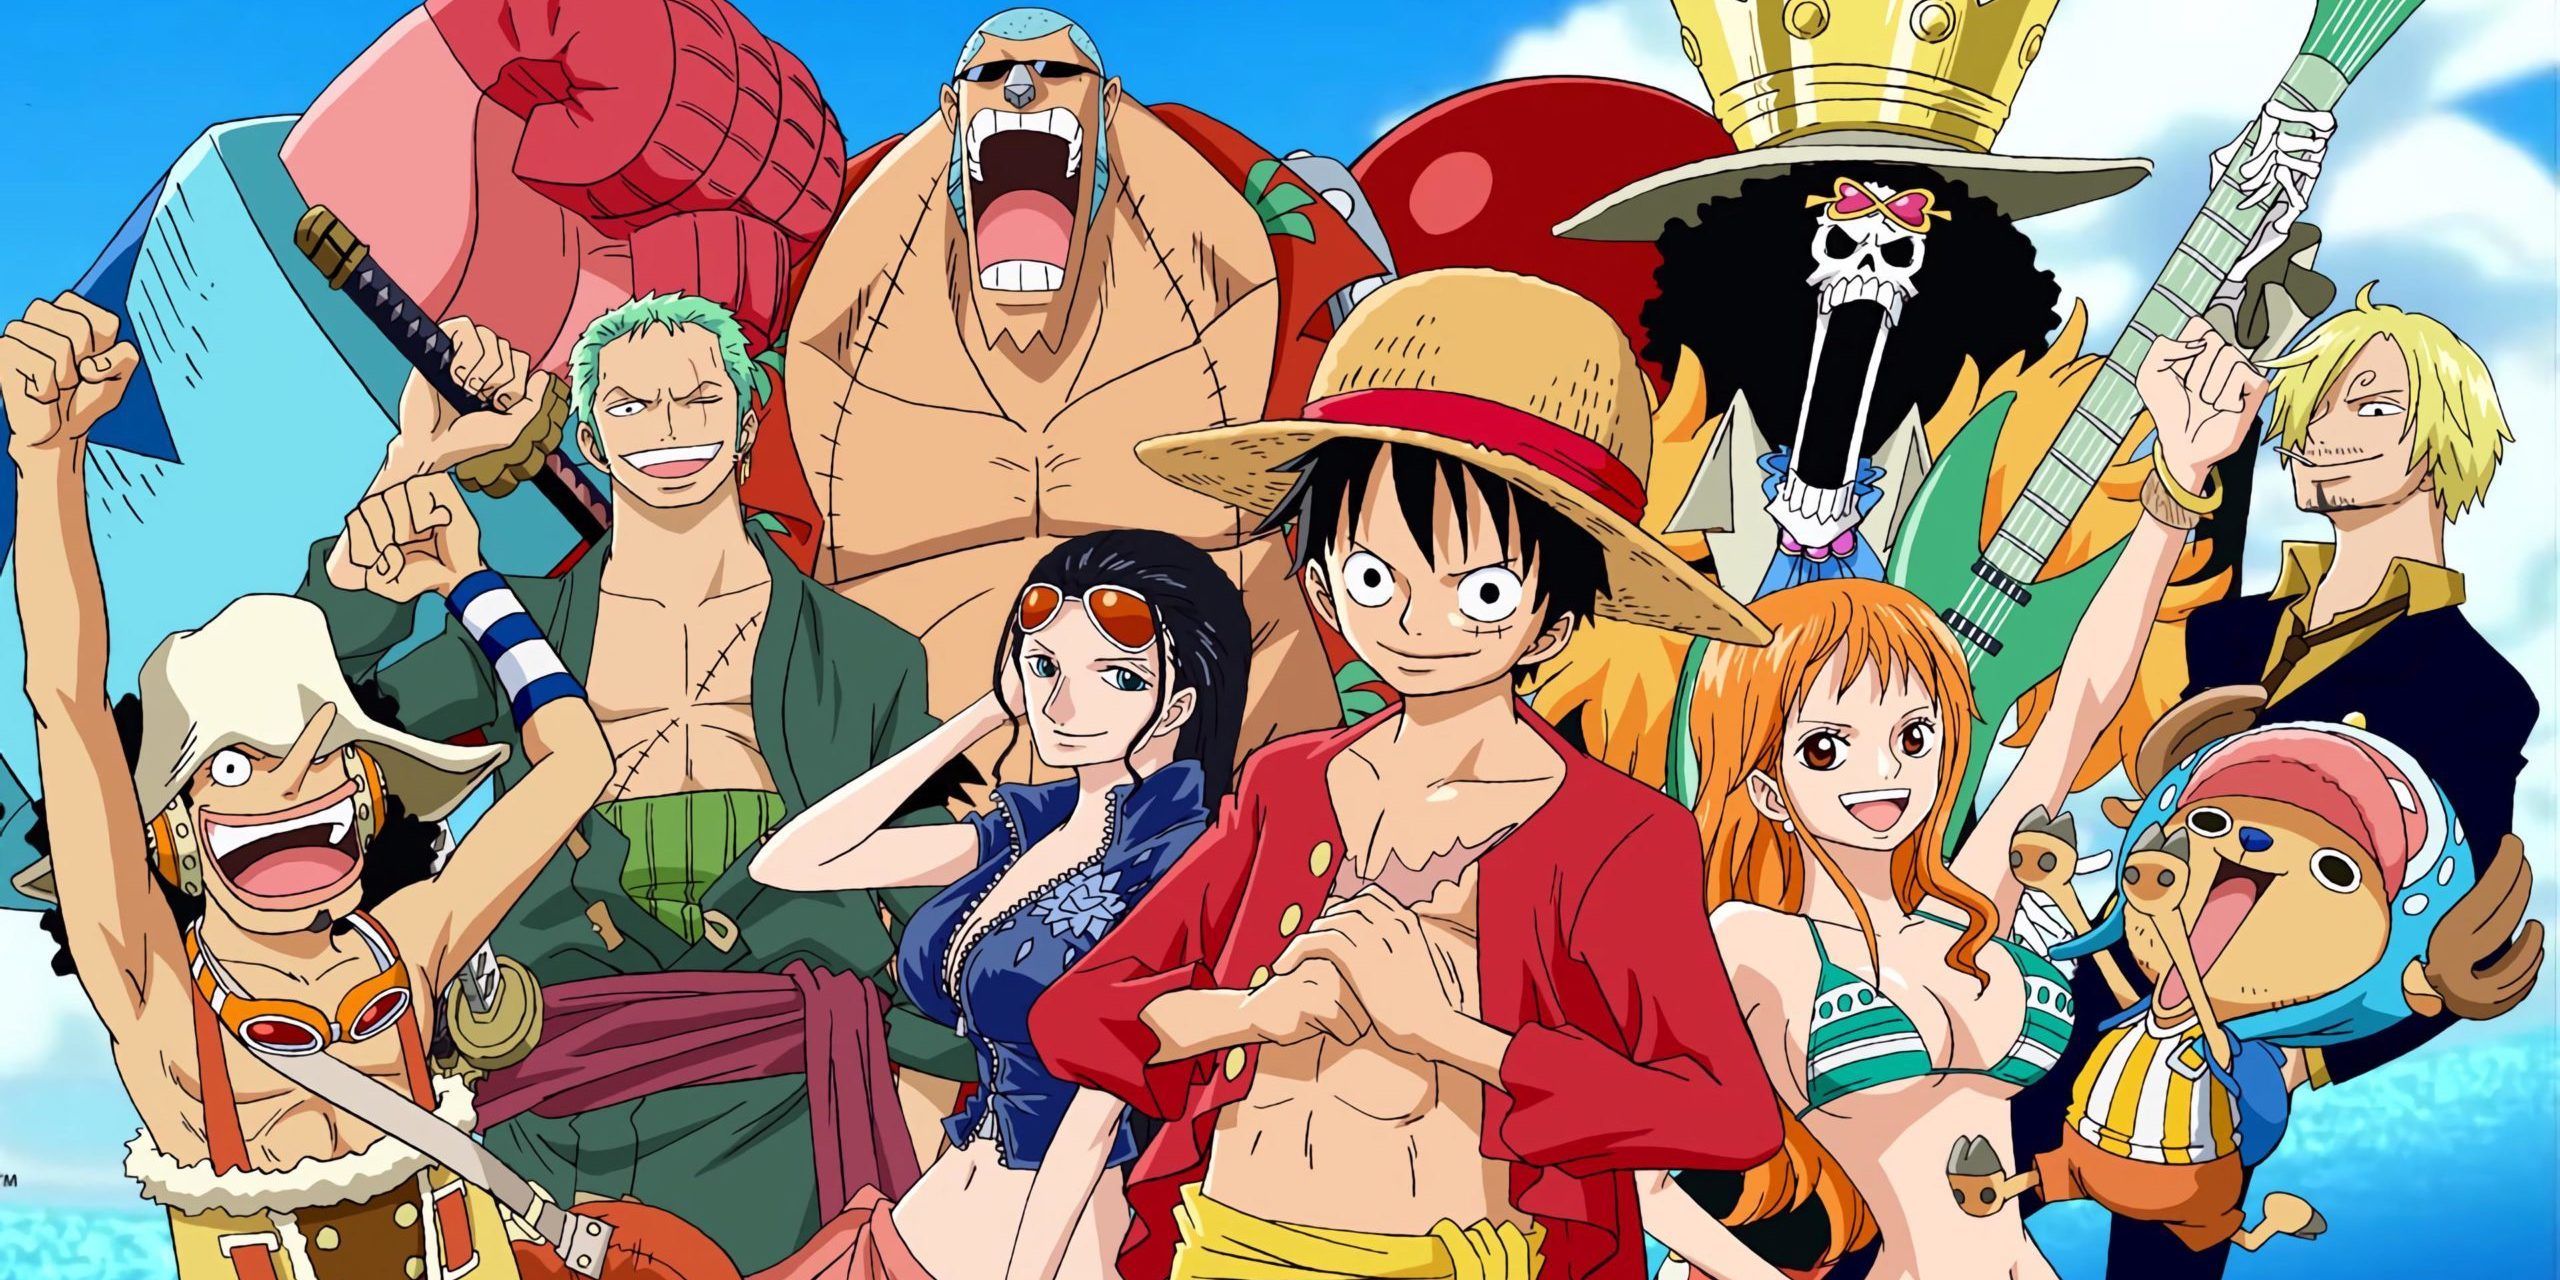 Luffy and the crew posing